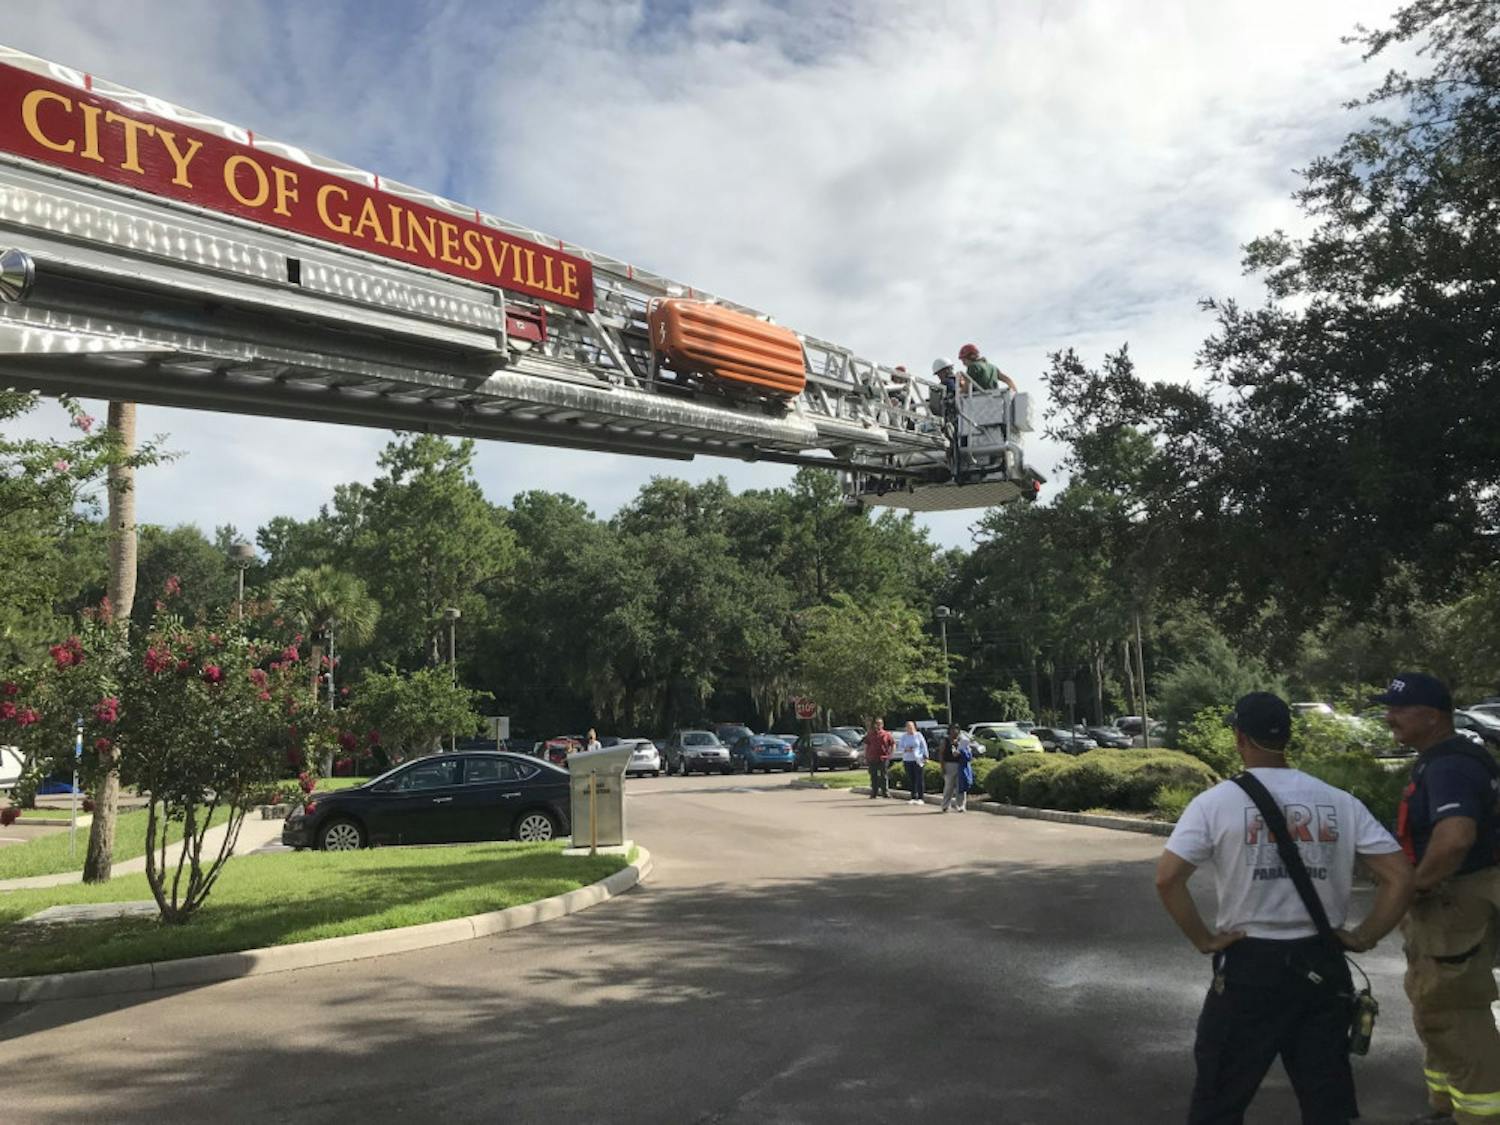 Gainesville firefighters watch as the fire truck’s basket is lifted into the air.
&nbsp;